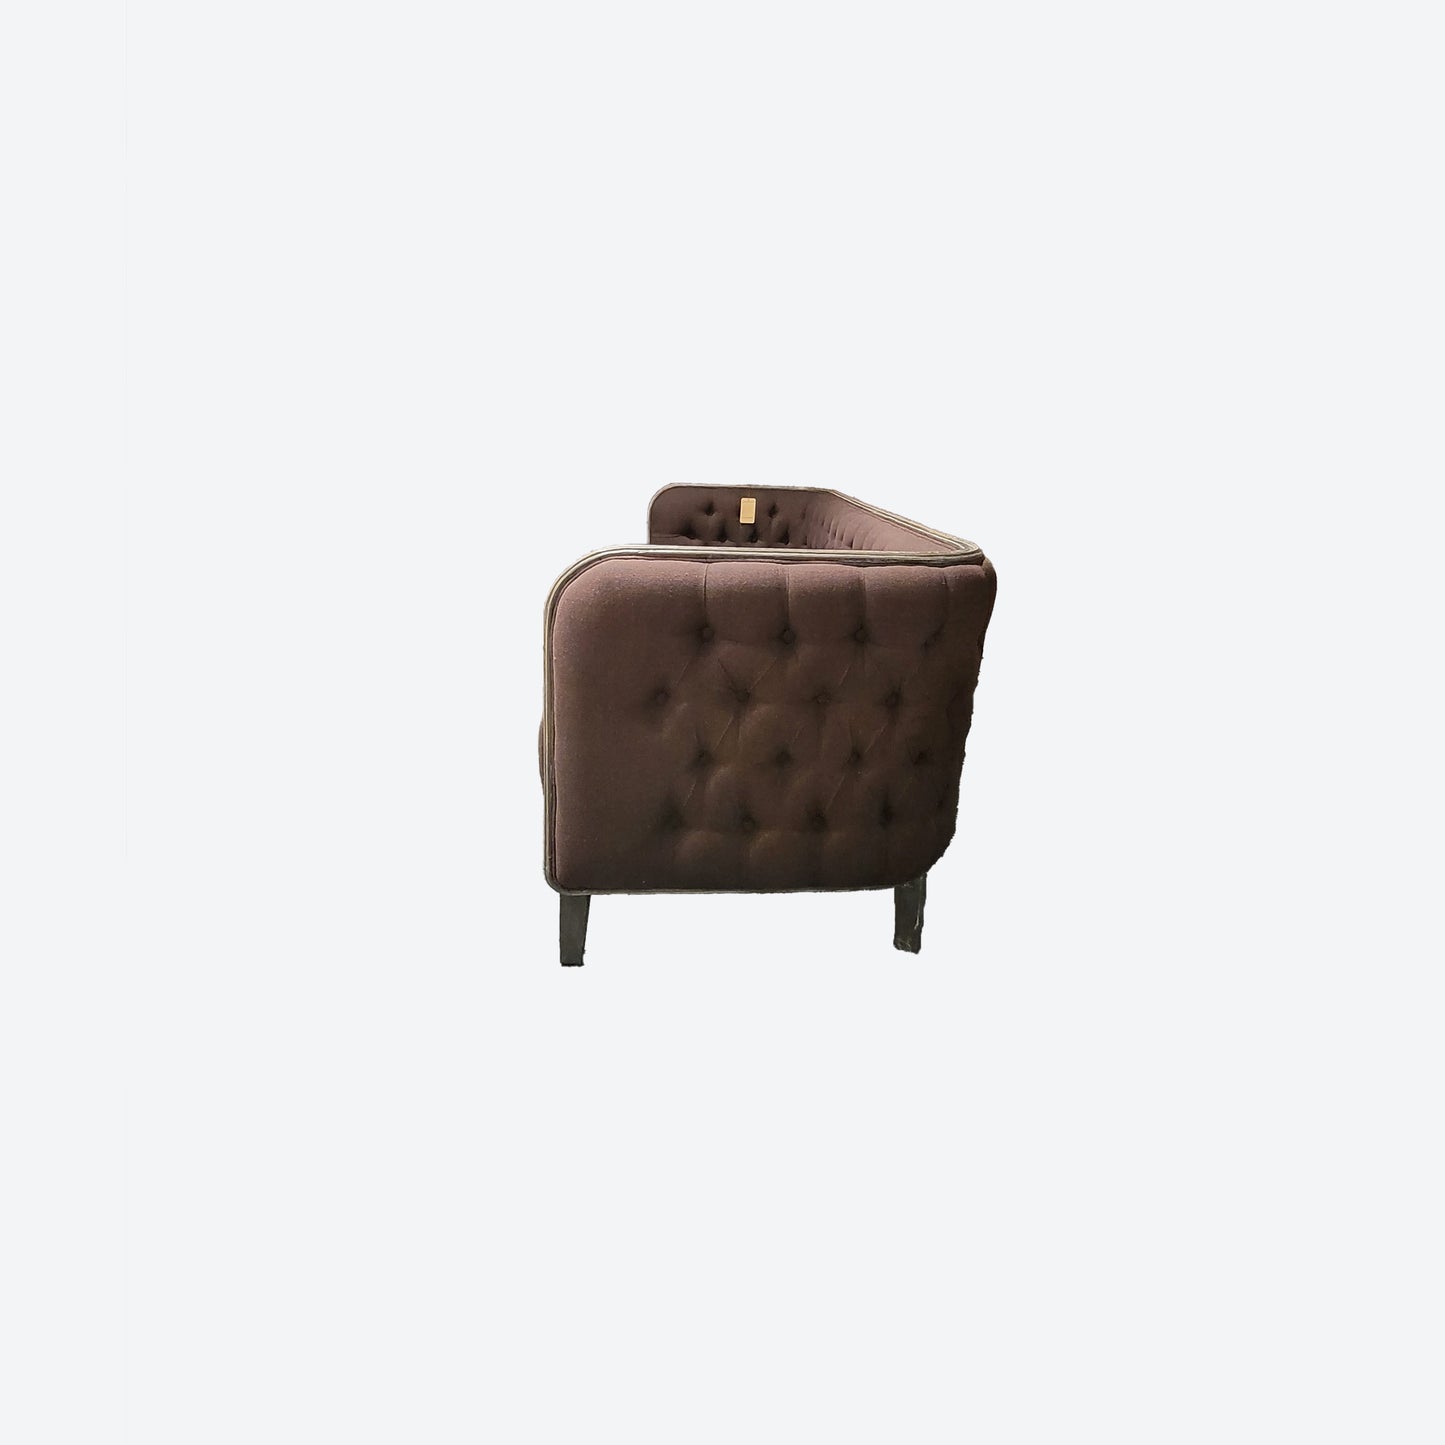 BROWN ORGANIC CANVAS FABRIC TUFTED [CHESTERFIELD LIKE] THREE SEATER SOFA WITH CEDAR ACCENTS -SK- SKU 1055